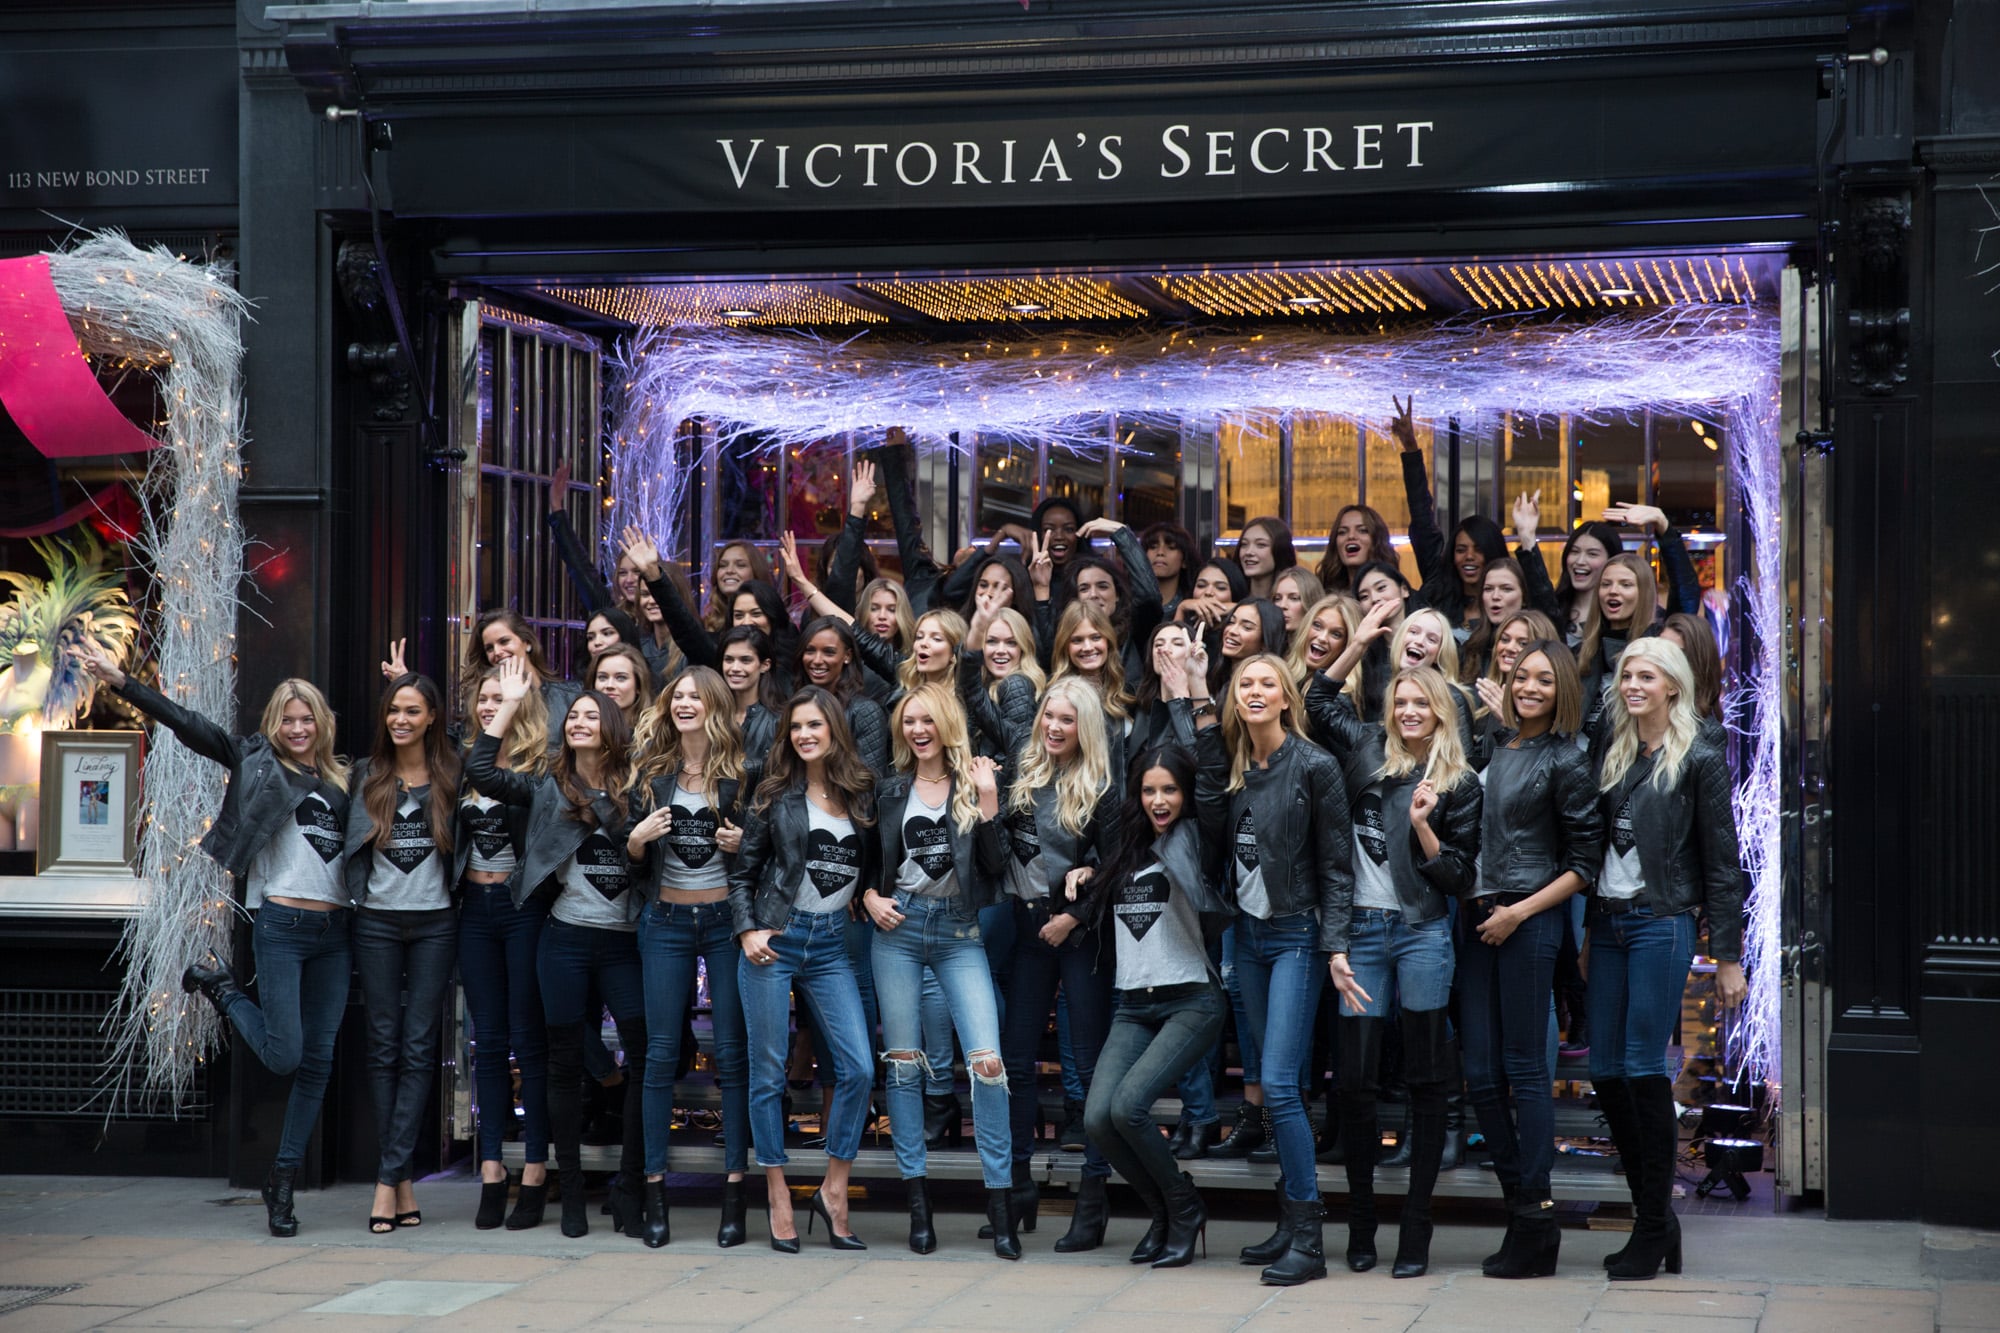 Confessions of a Former Victoria's Secret Employee